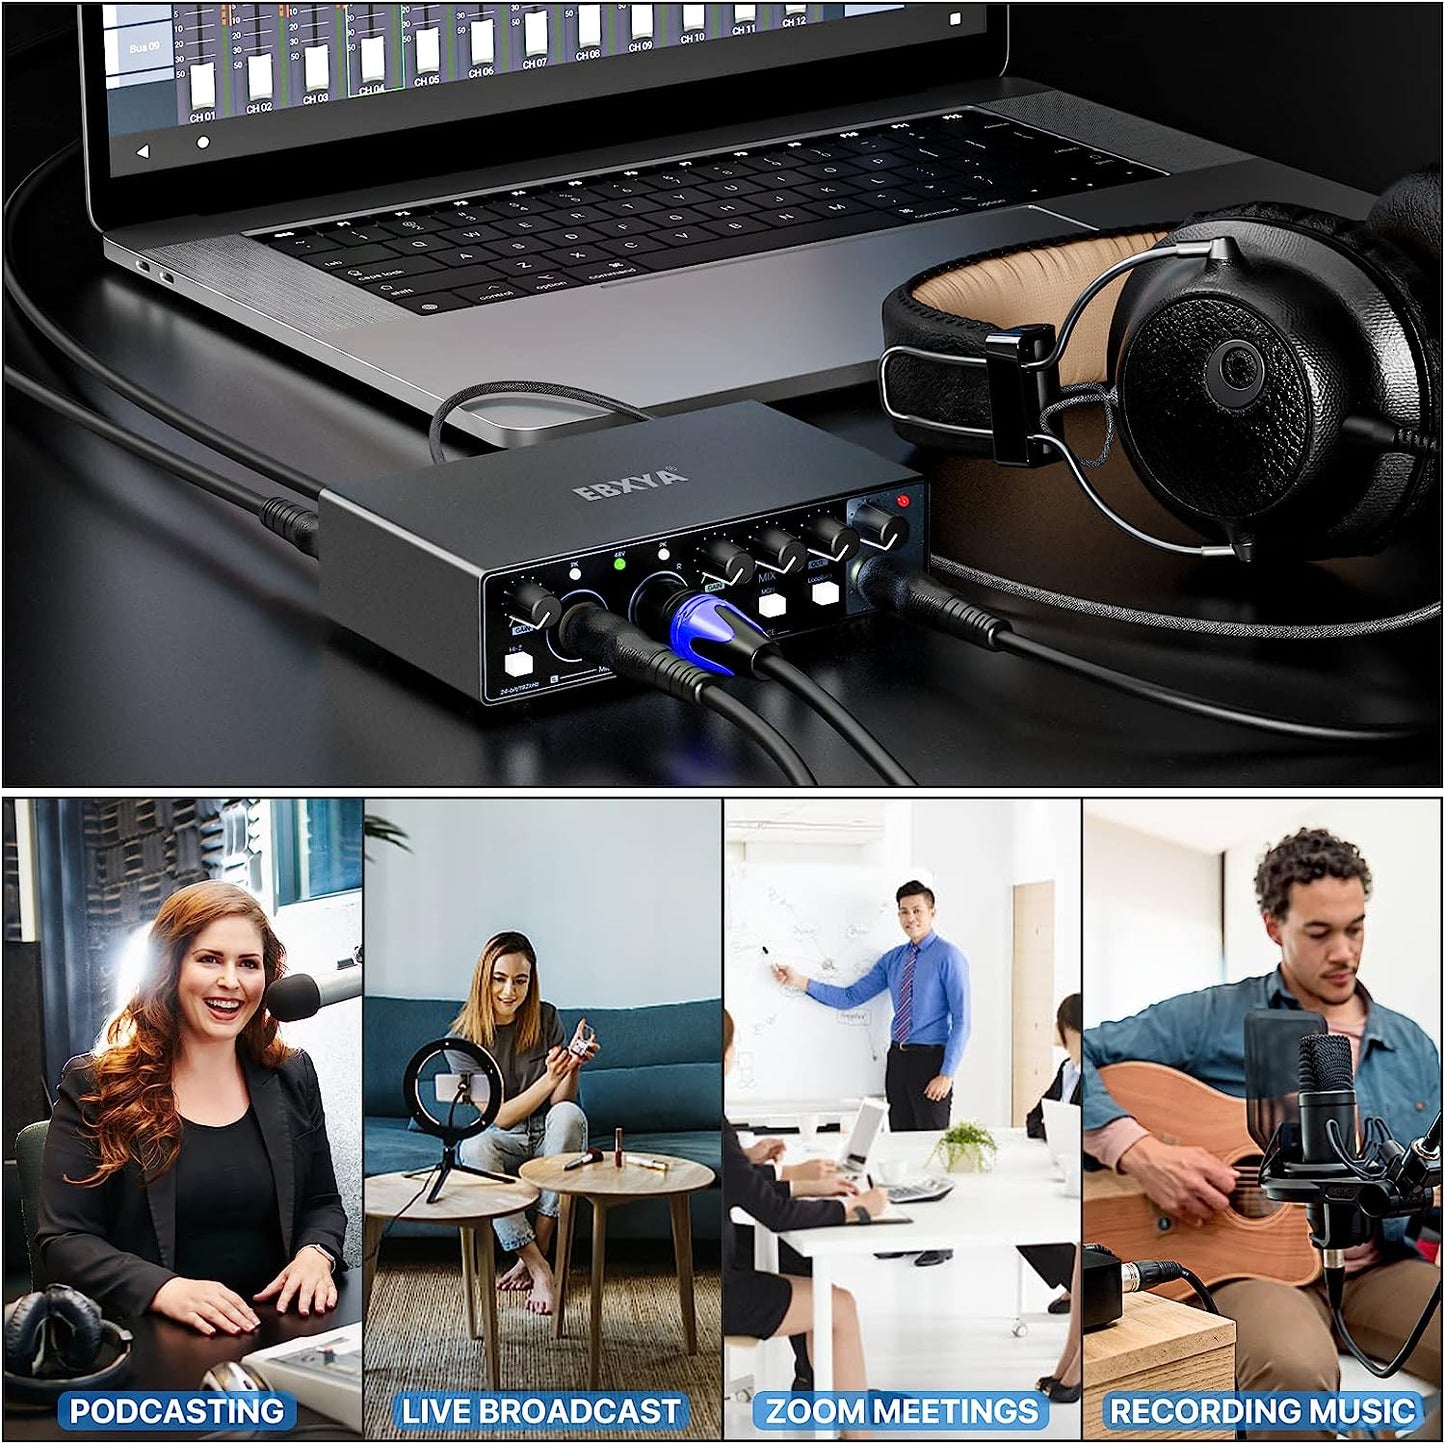 EBXYA 2x2 USB Audio Interface for Recording, Streaming and Podcasting, 24Bit/196kHz High-Fidelity, Studio Quality Audio Interface for Guitarist, Vocalist, Podcaster or Producer